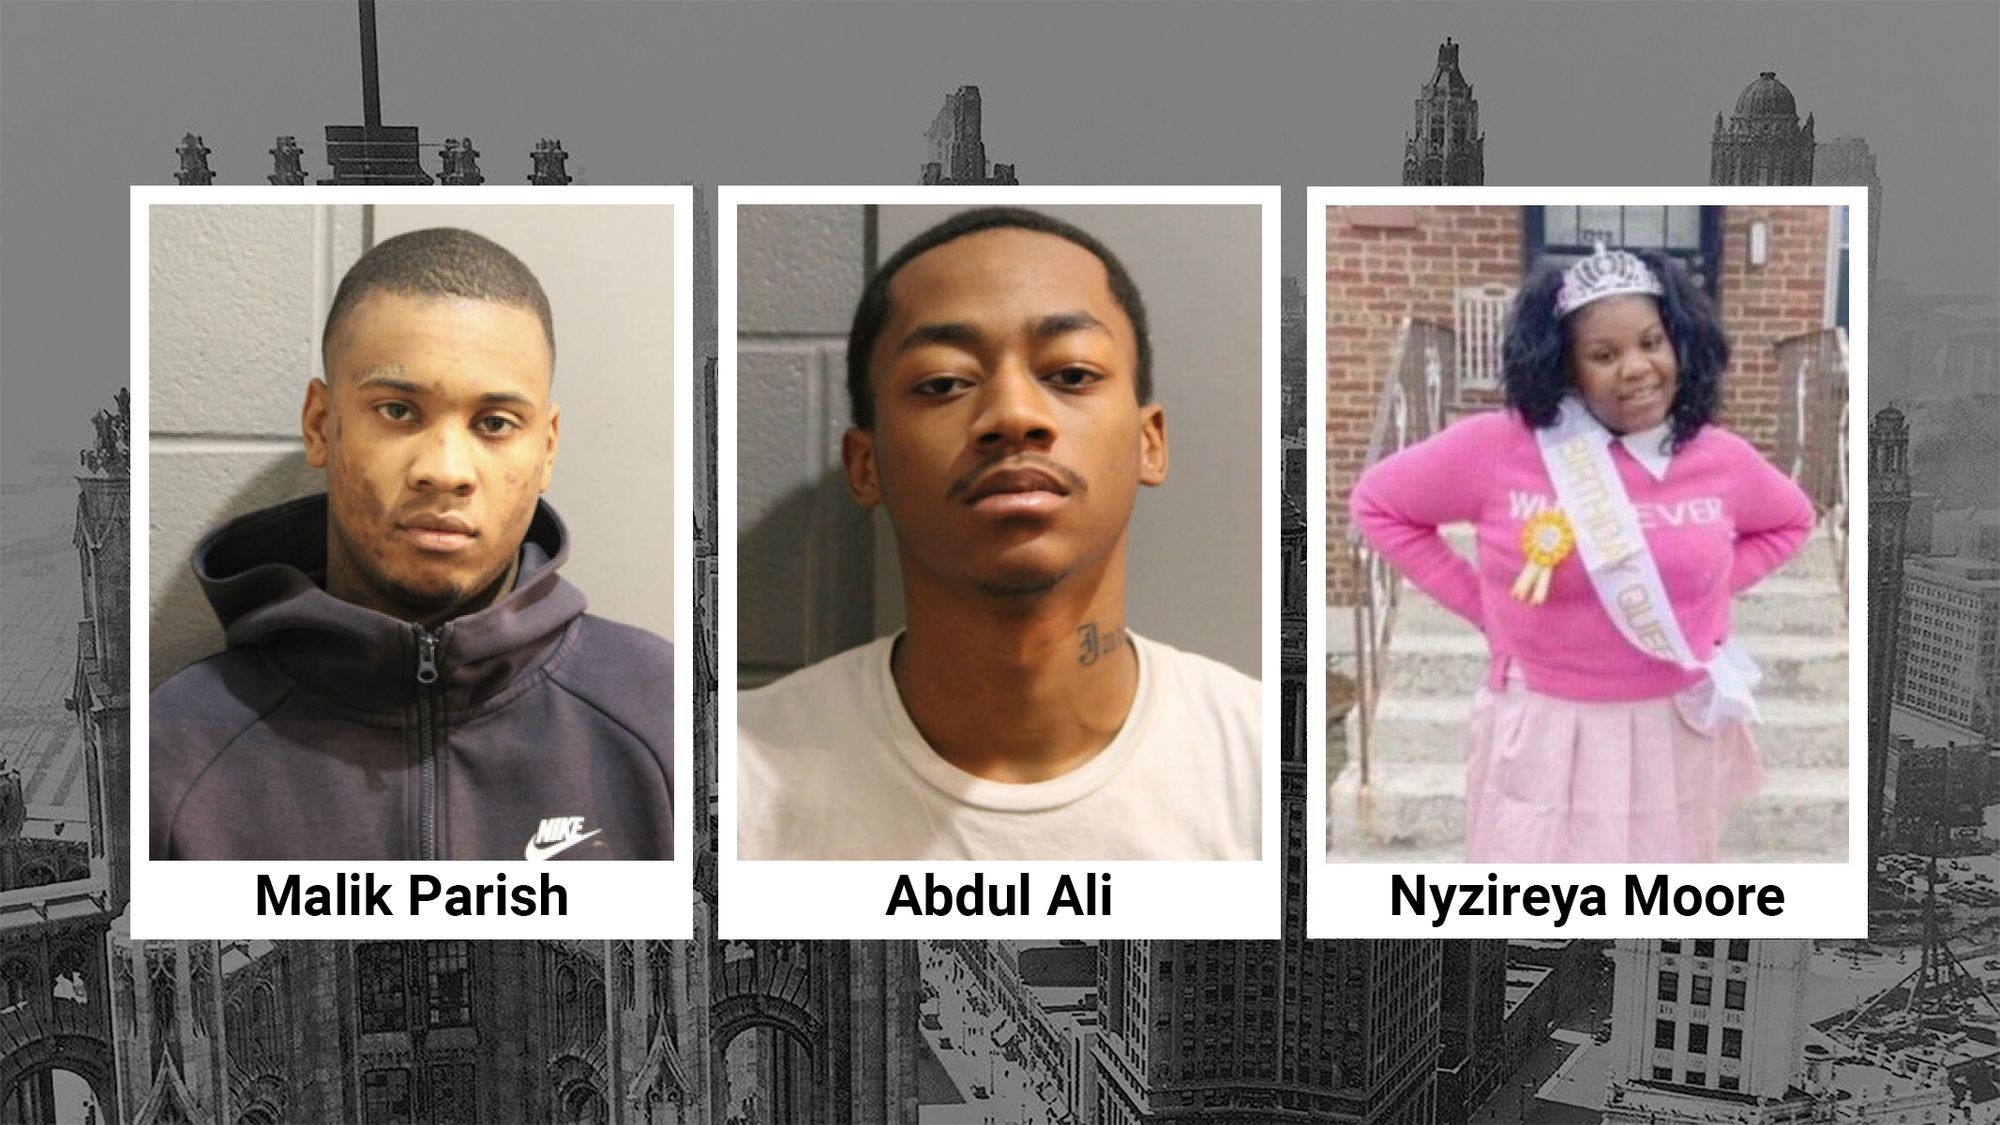 Abdul Ali And Malik Parish Arrested: Charged In The Fatal Shooting Of 12-Year-Old Nyzireya Moore